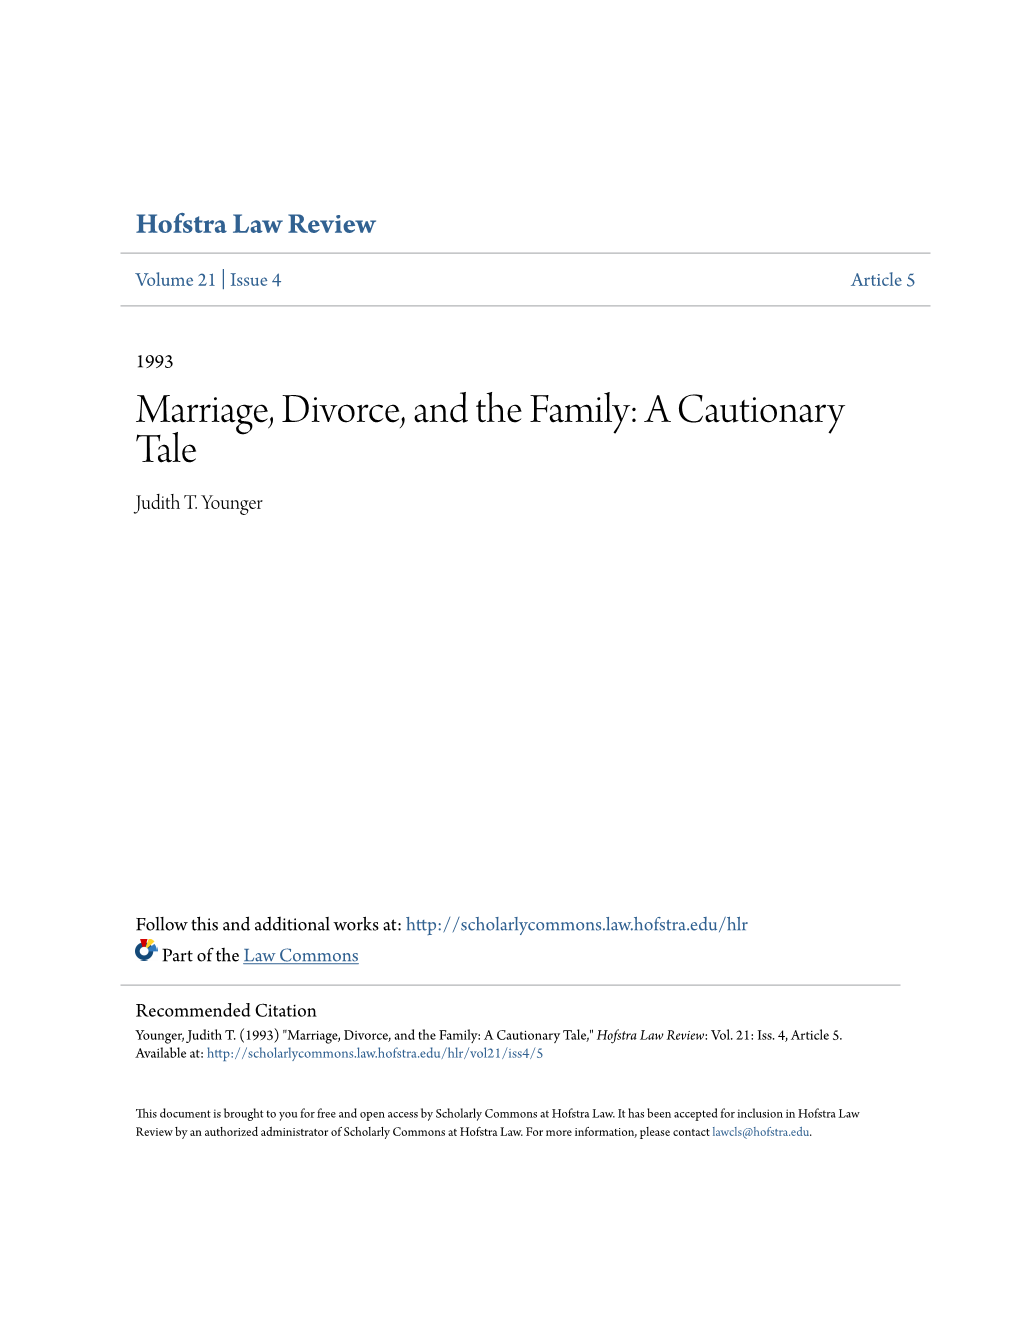 Marriage, Divorce, and the Family: a Cautionary Tale Judith T